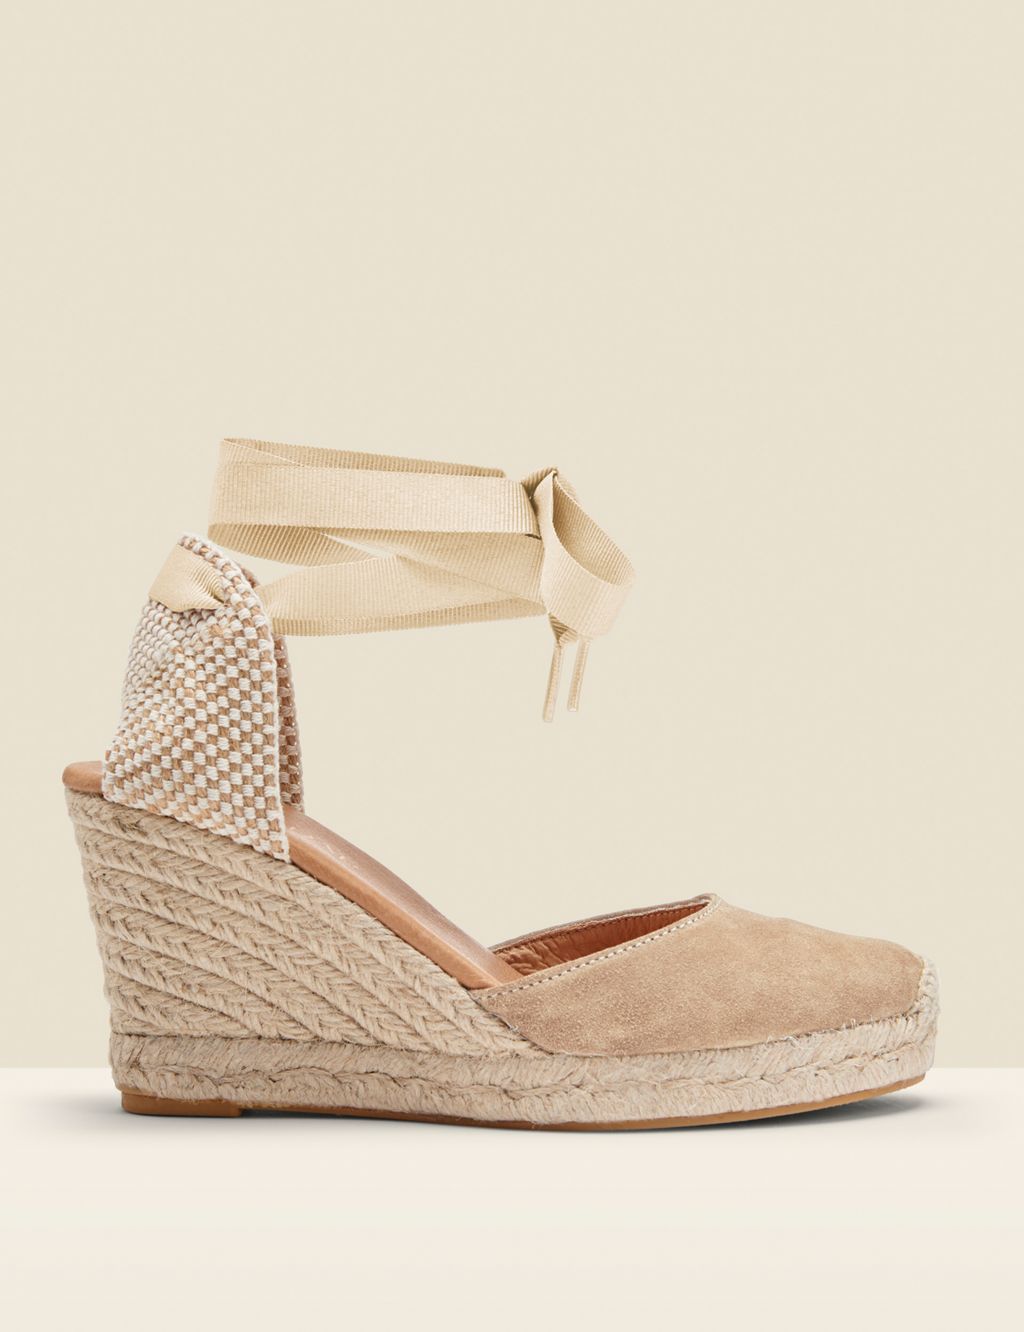 Suede Lace Up Wedge Espadrilles image 2